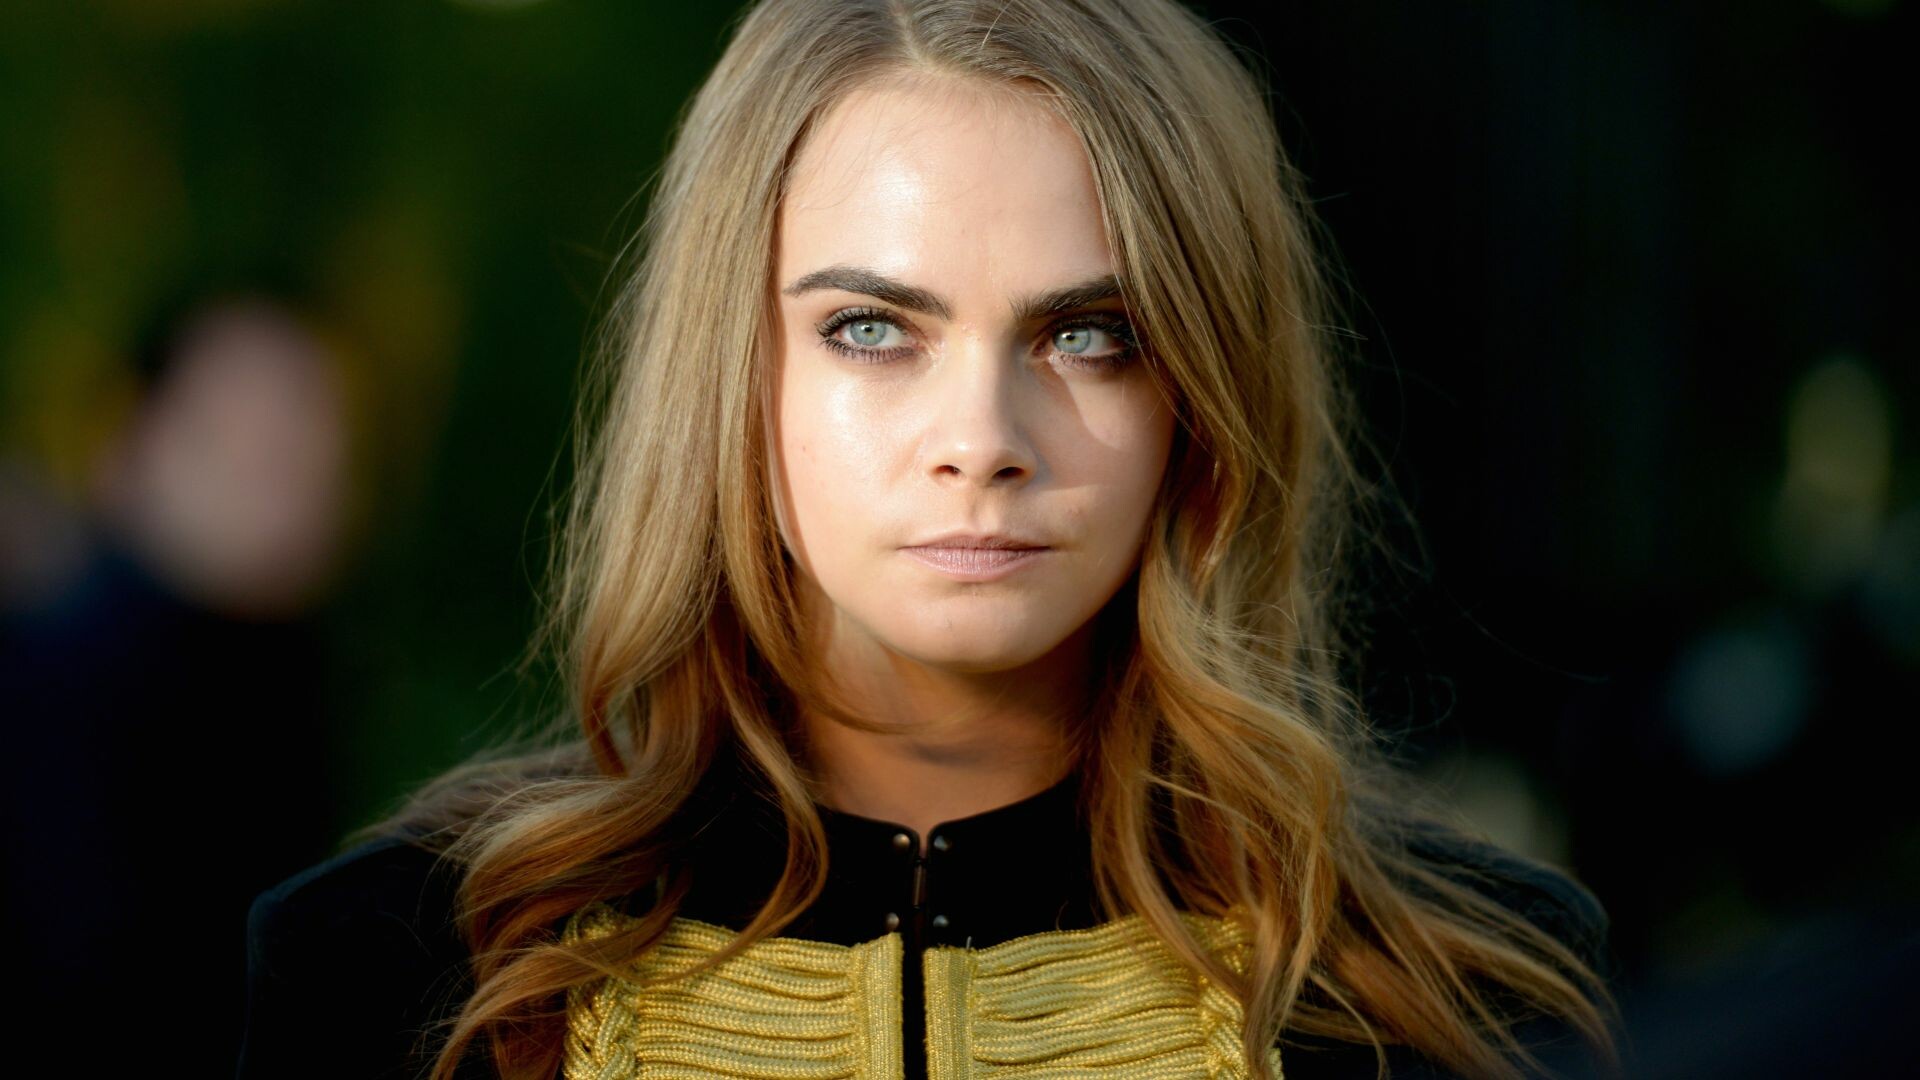 Cara Delevingne: An English model, actress and singer, Born in London into an affluent English family. 1920x1080 Full HD Wallpaper.